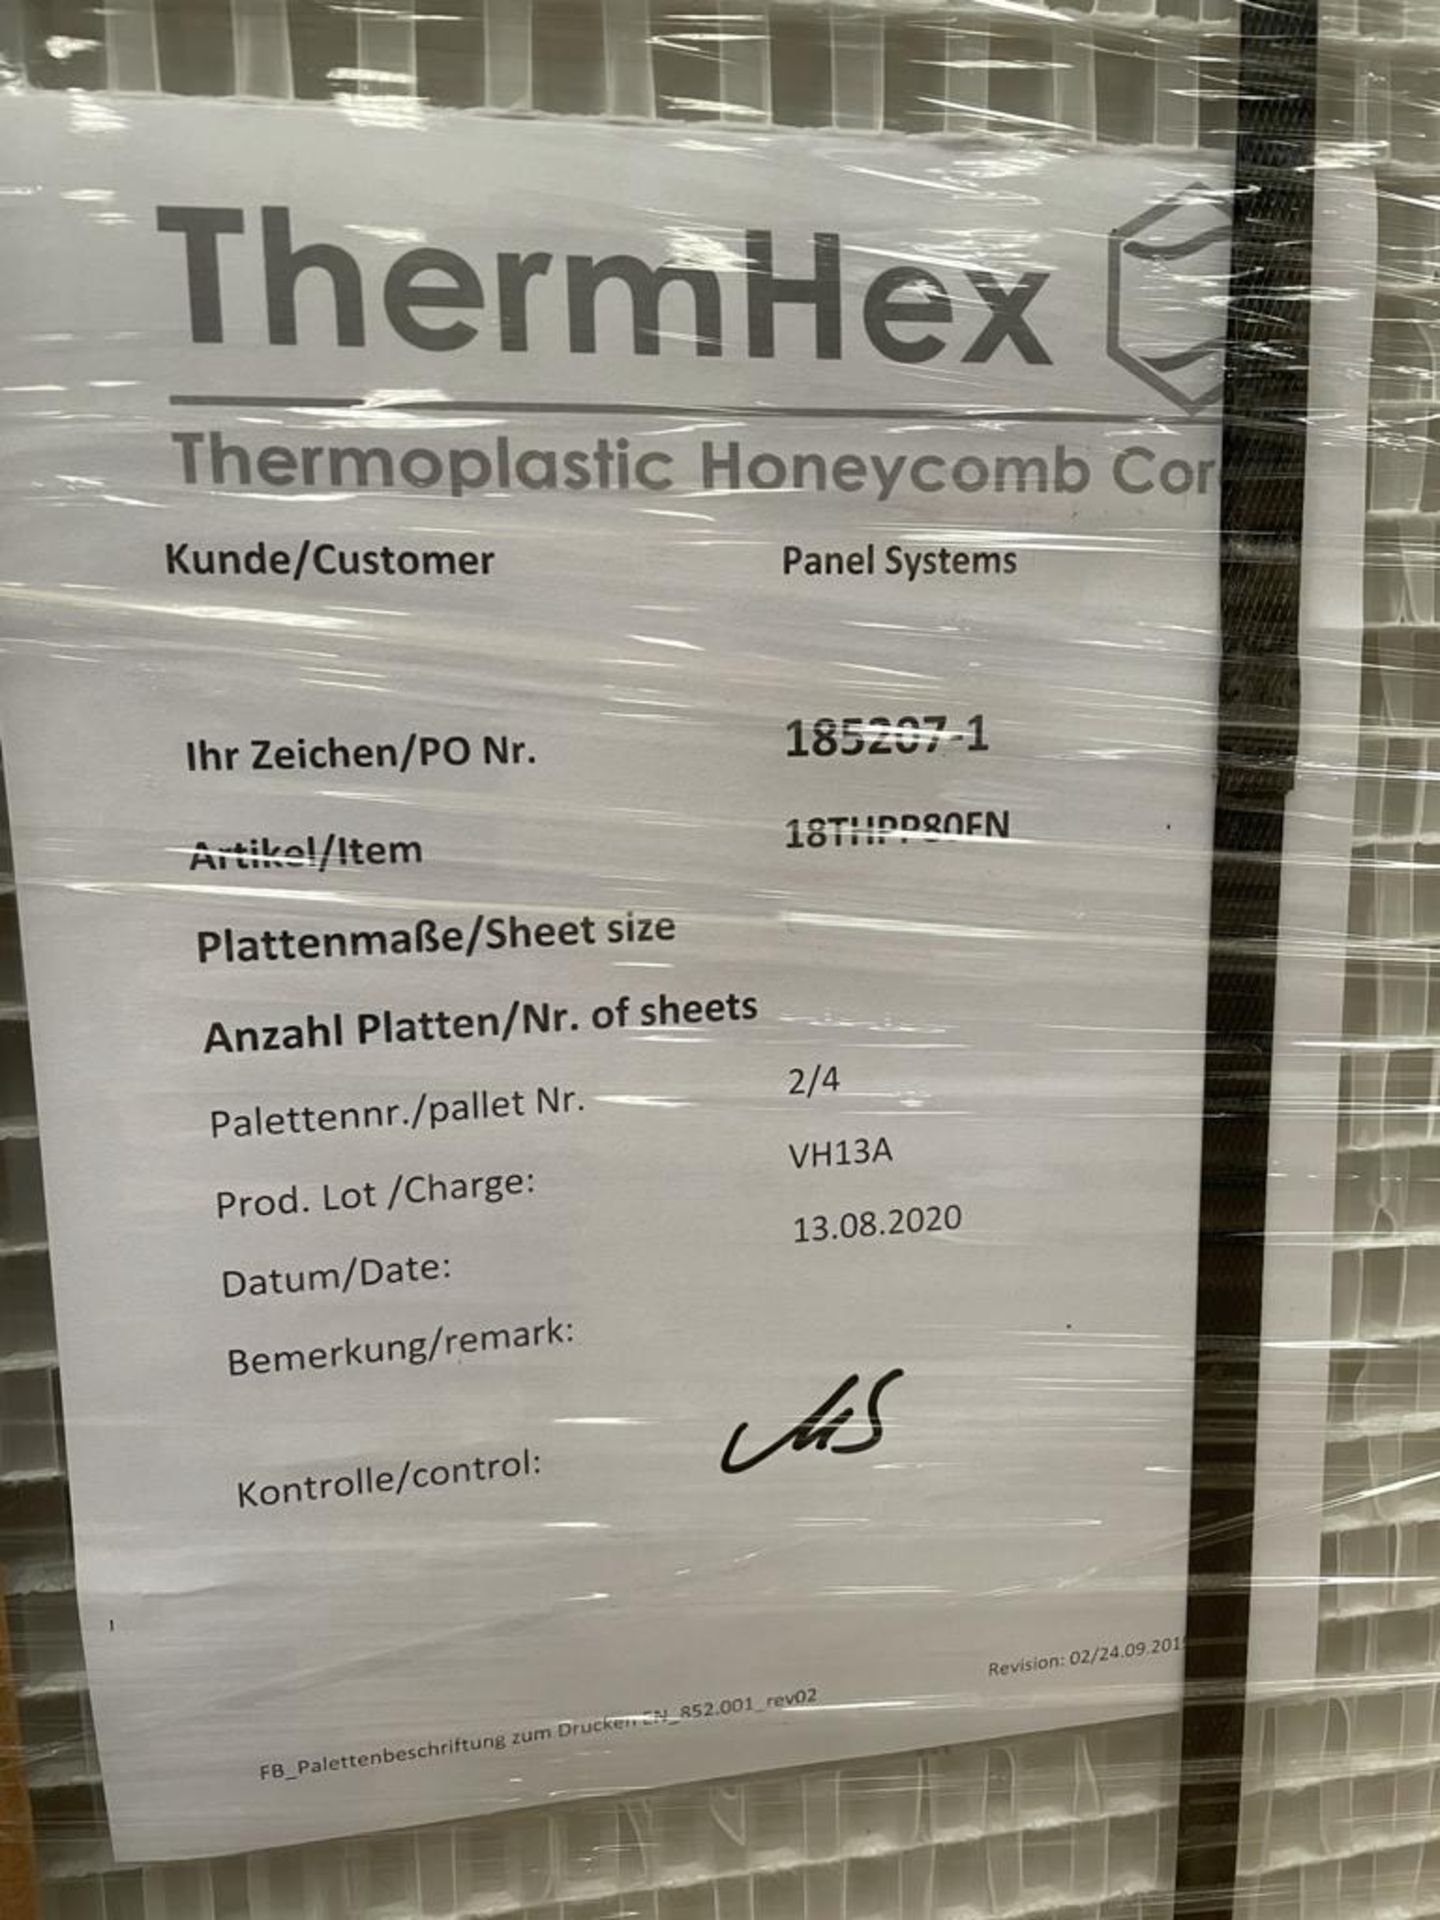 100 x ThermHex Thermoplastic Honeycomb Core Panels - Size: 3175 x 1210 x 20mm - New Stock - Lightwe - Image 4 of 8